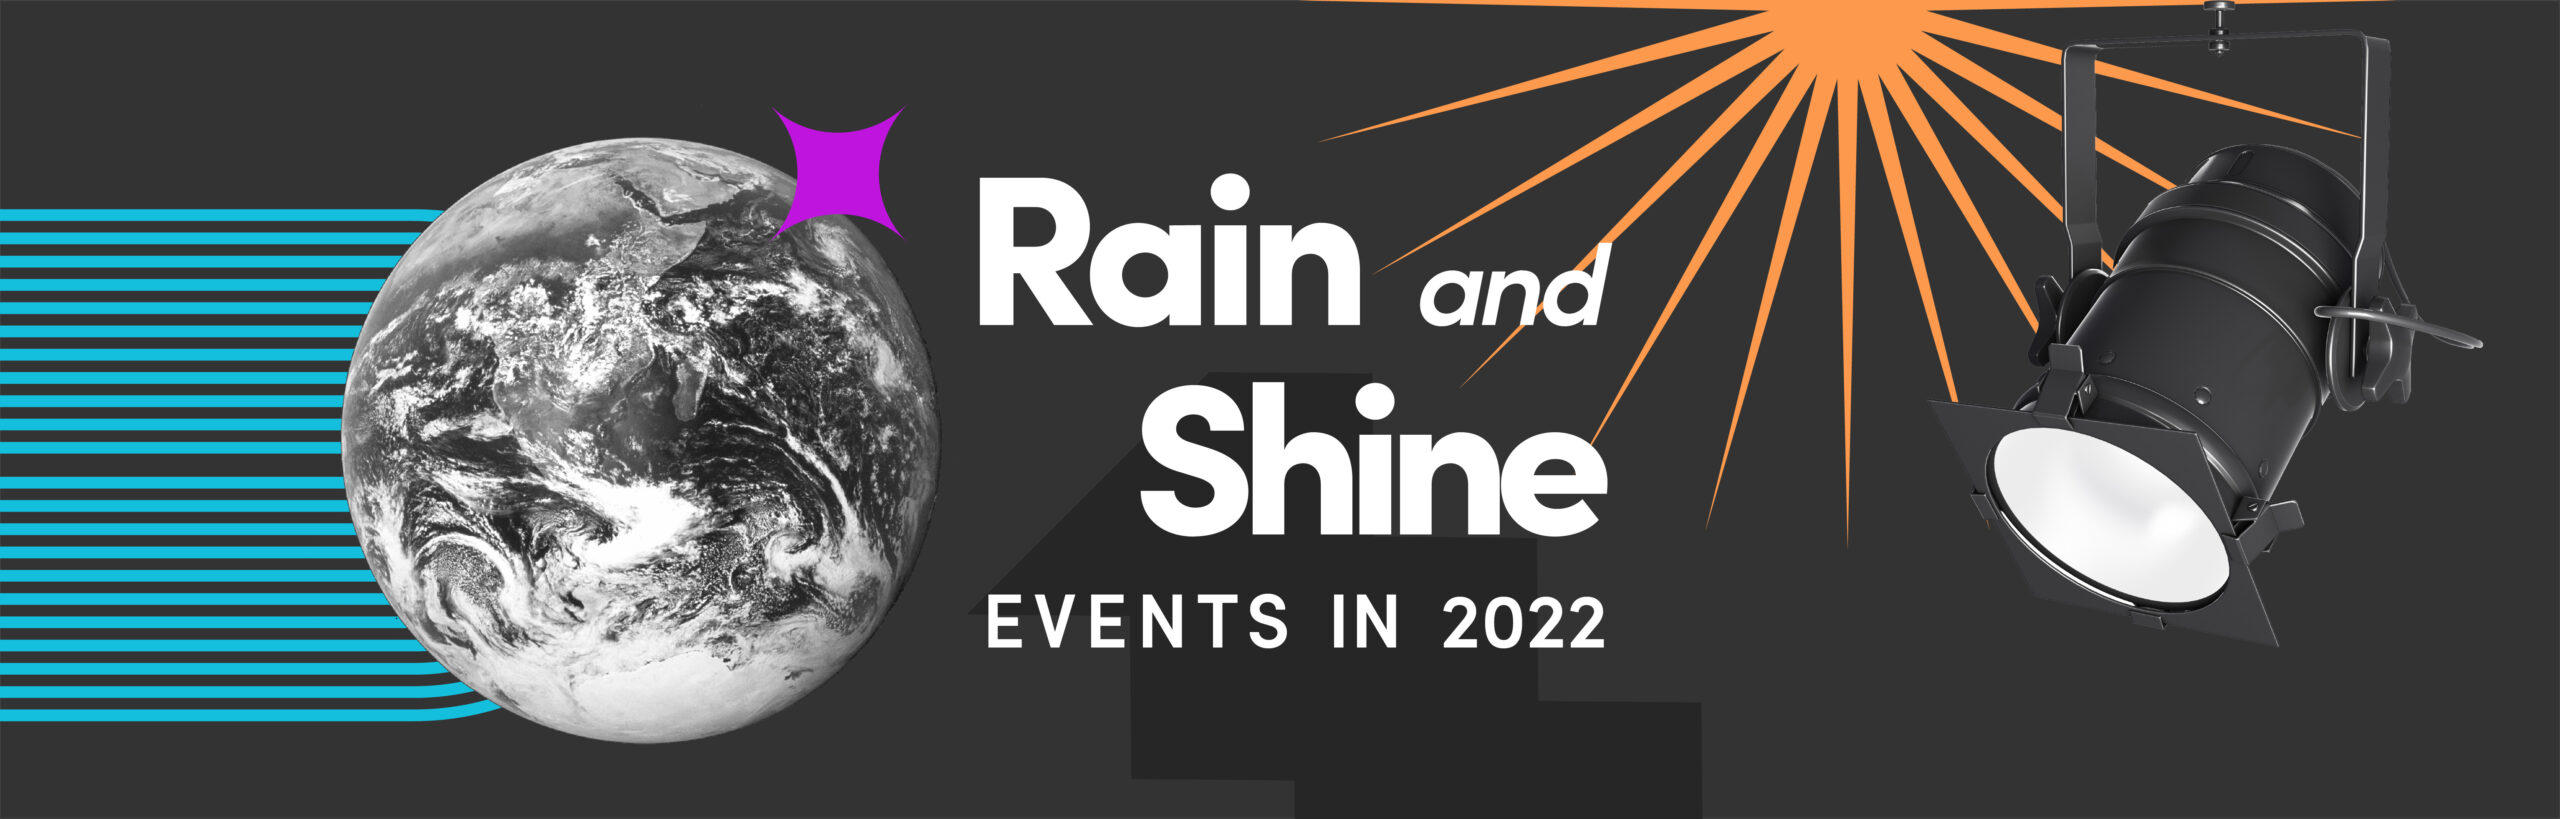 A globe and graphics surrounding the text "Rain and Shine Events in 2022"